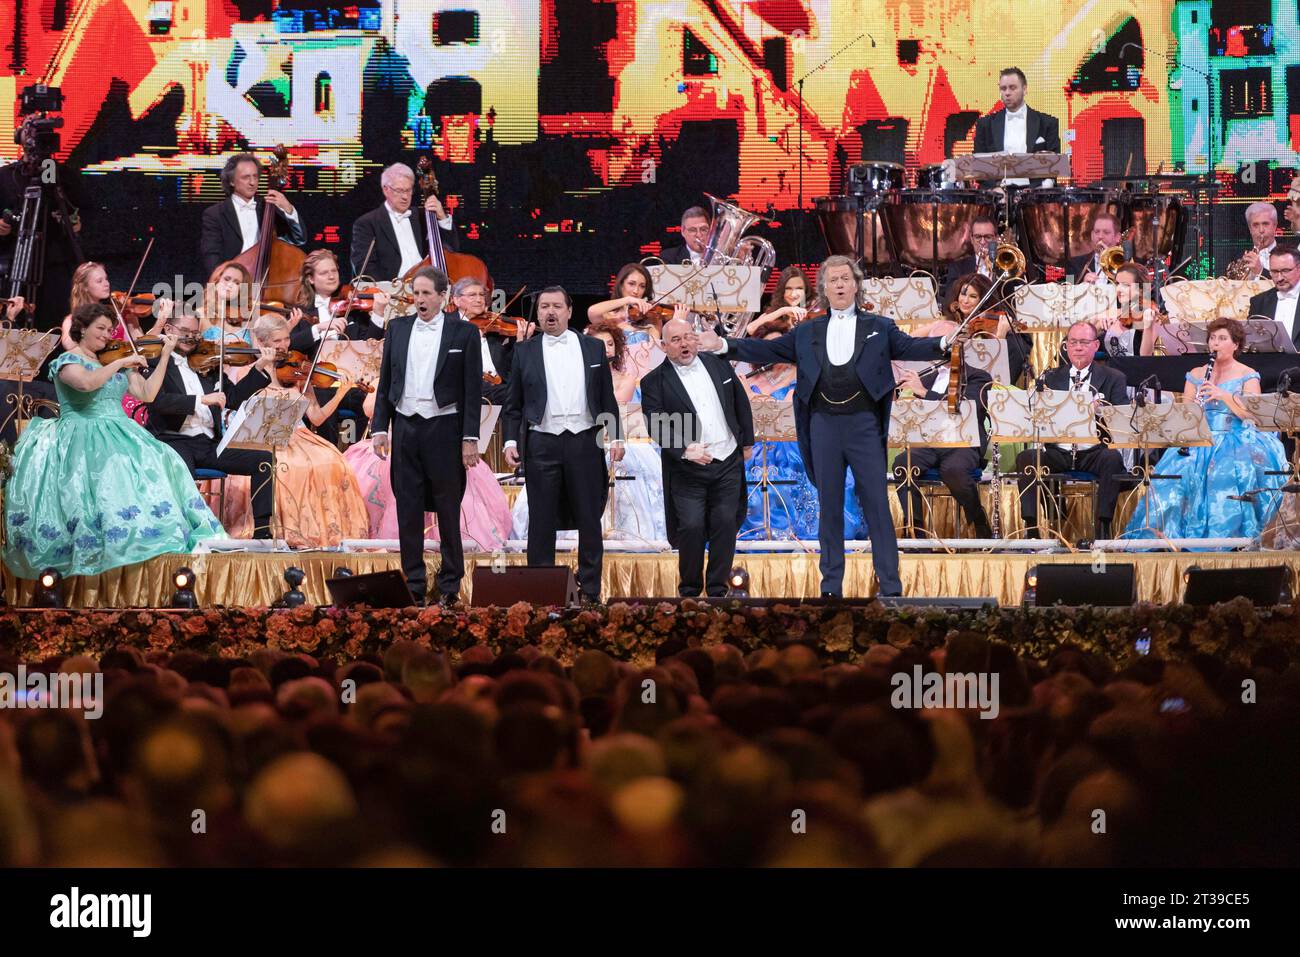 The famous violinist Andre Rieu, together with the Johann Strauss Orchestra, gives a series of concerts in Cluj-Napoca. Cluj-Napoca, Tuesday, February Stock Photo